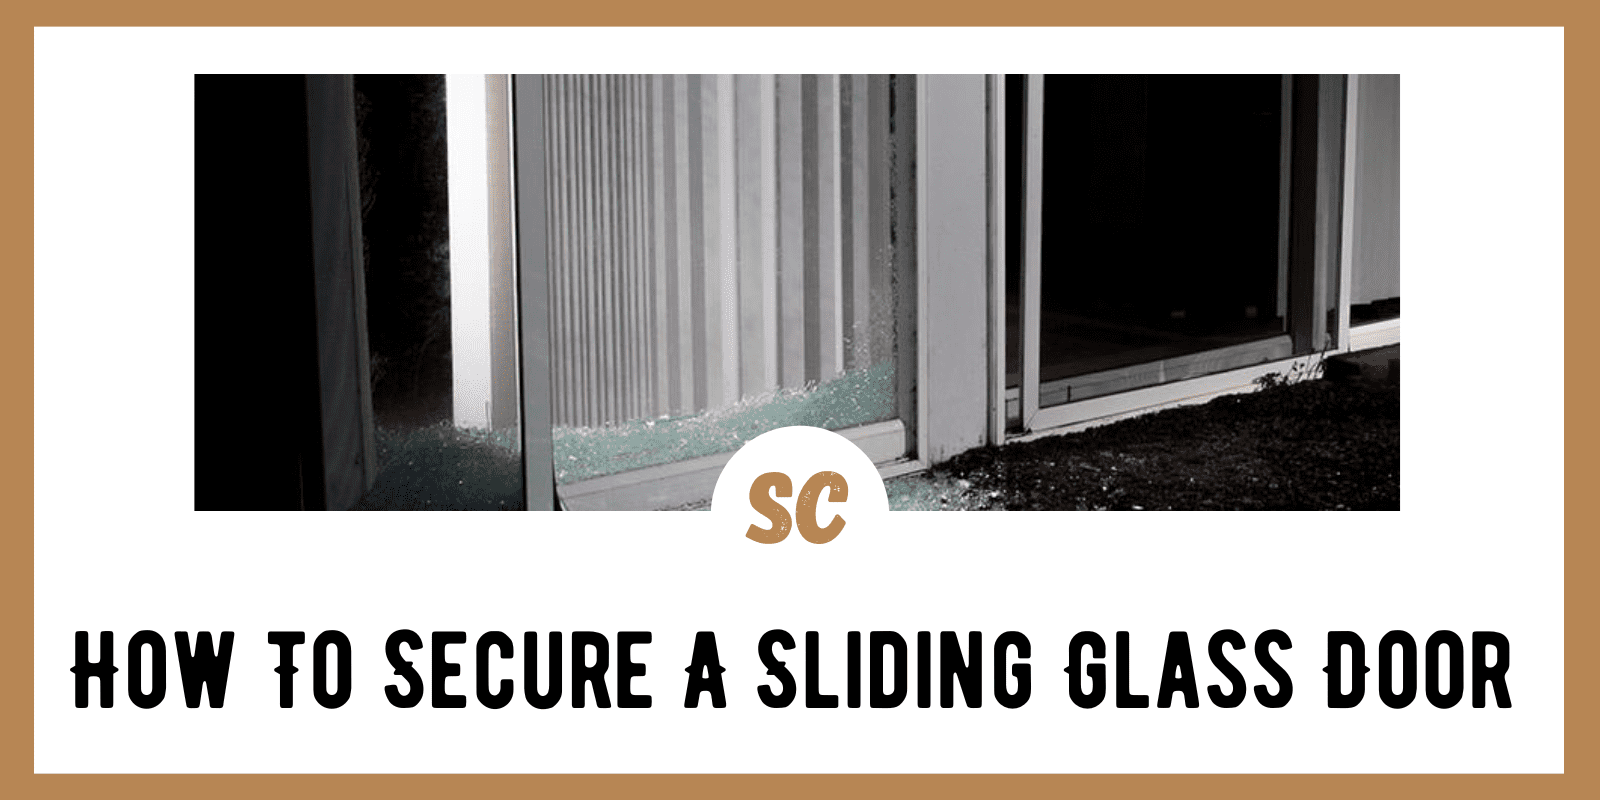 How To Secure A Sliding Glass Door